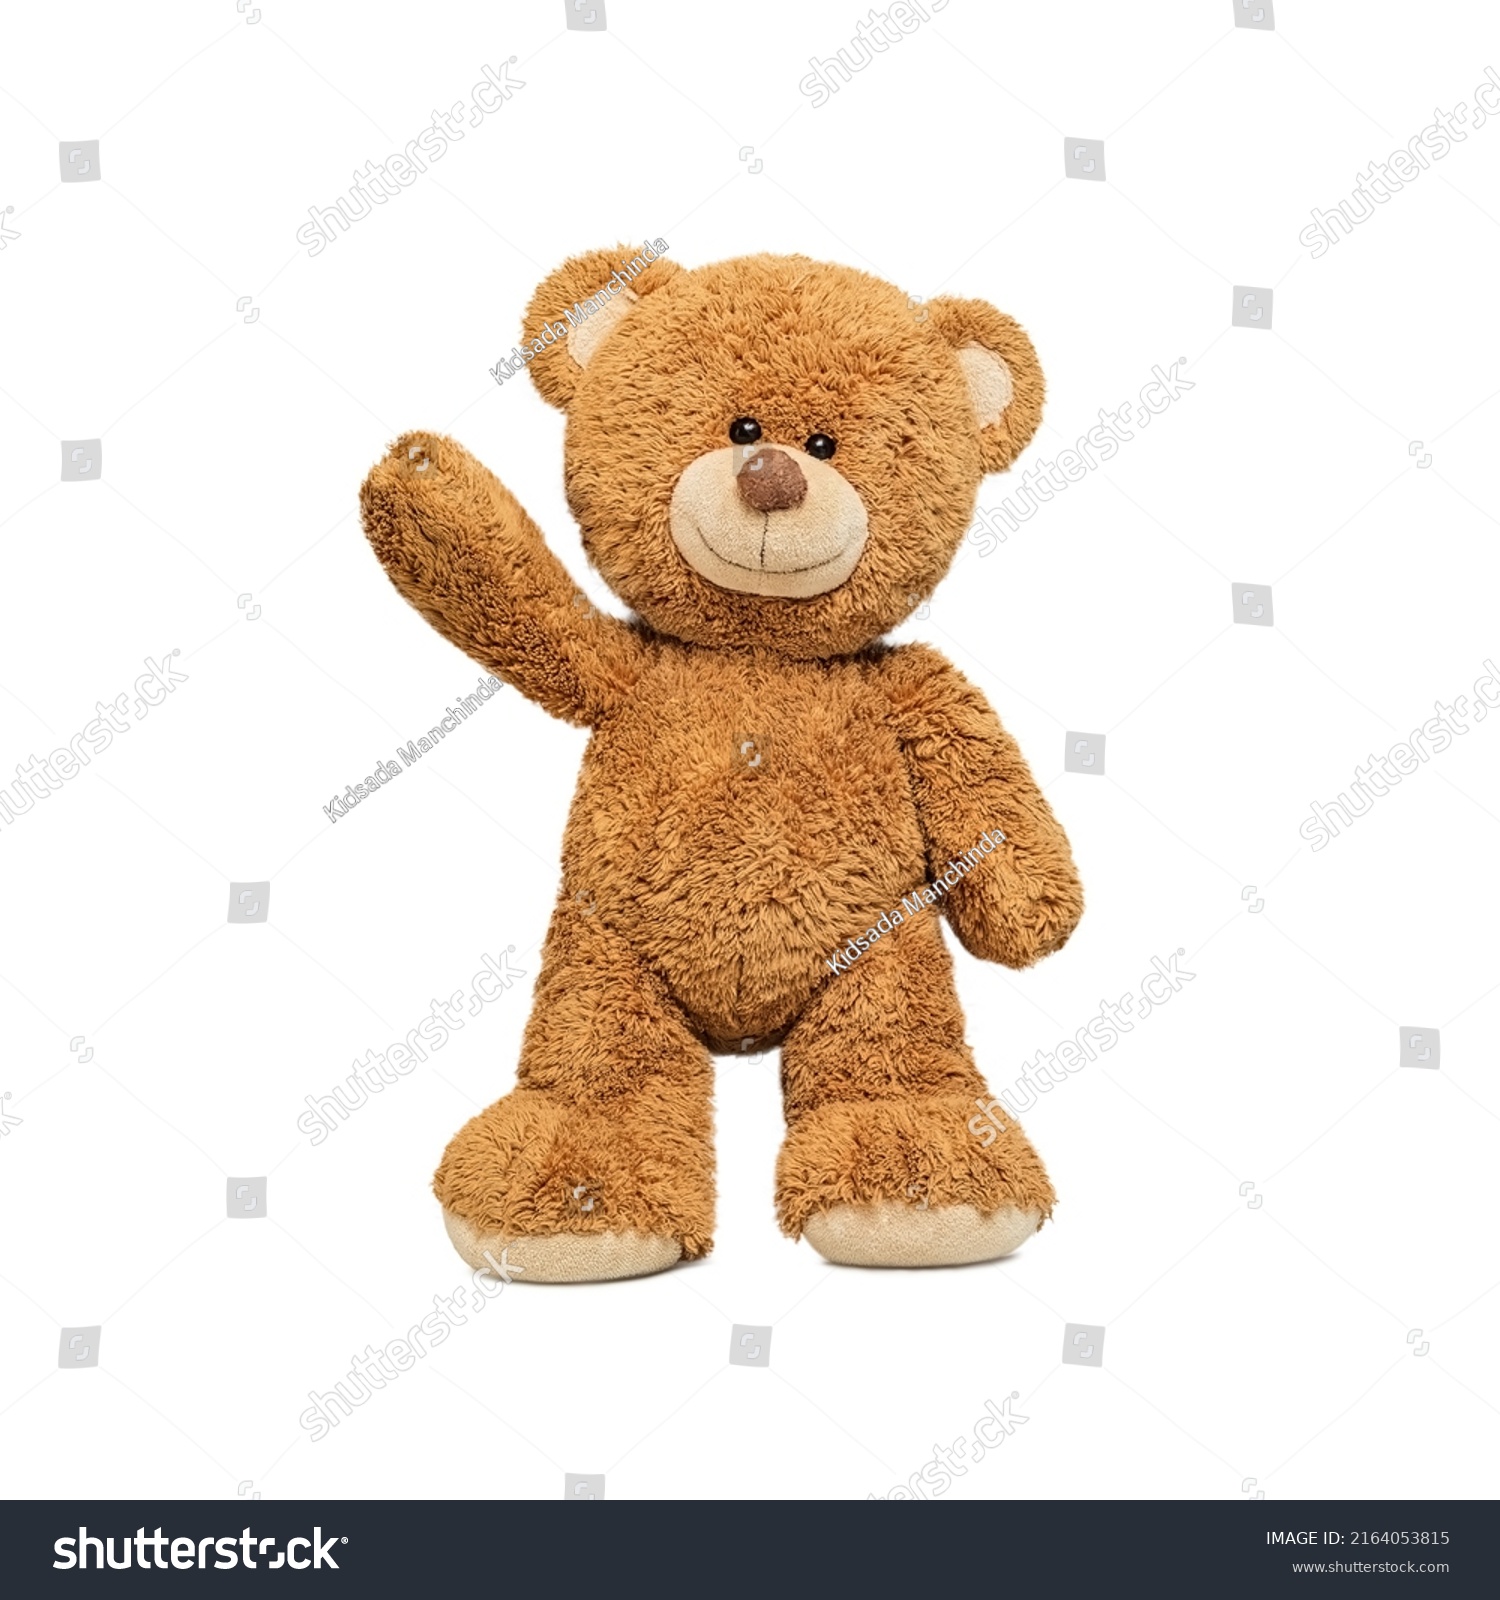 Cute teddy bear isolated on white background. #2164053815